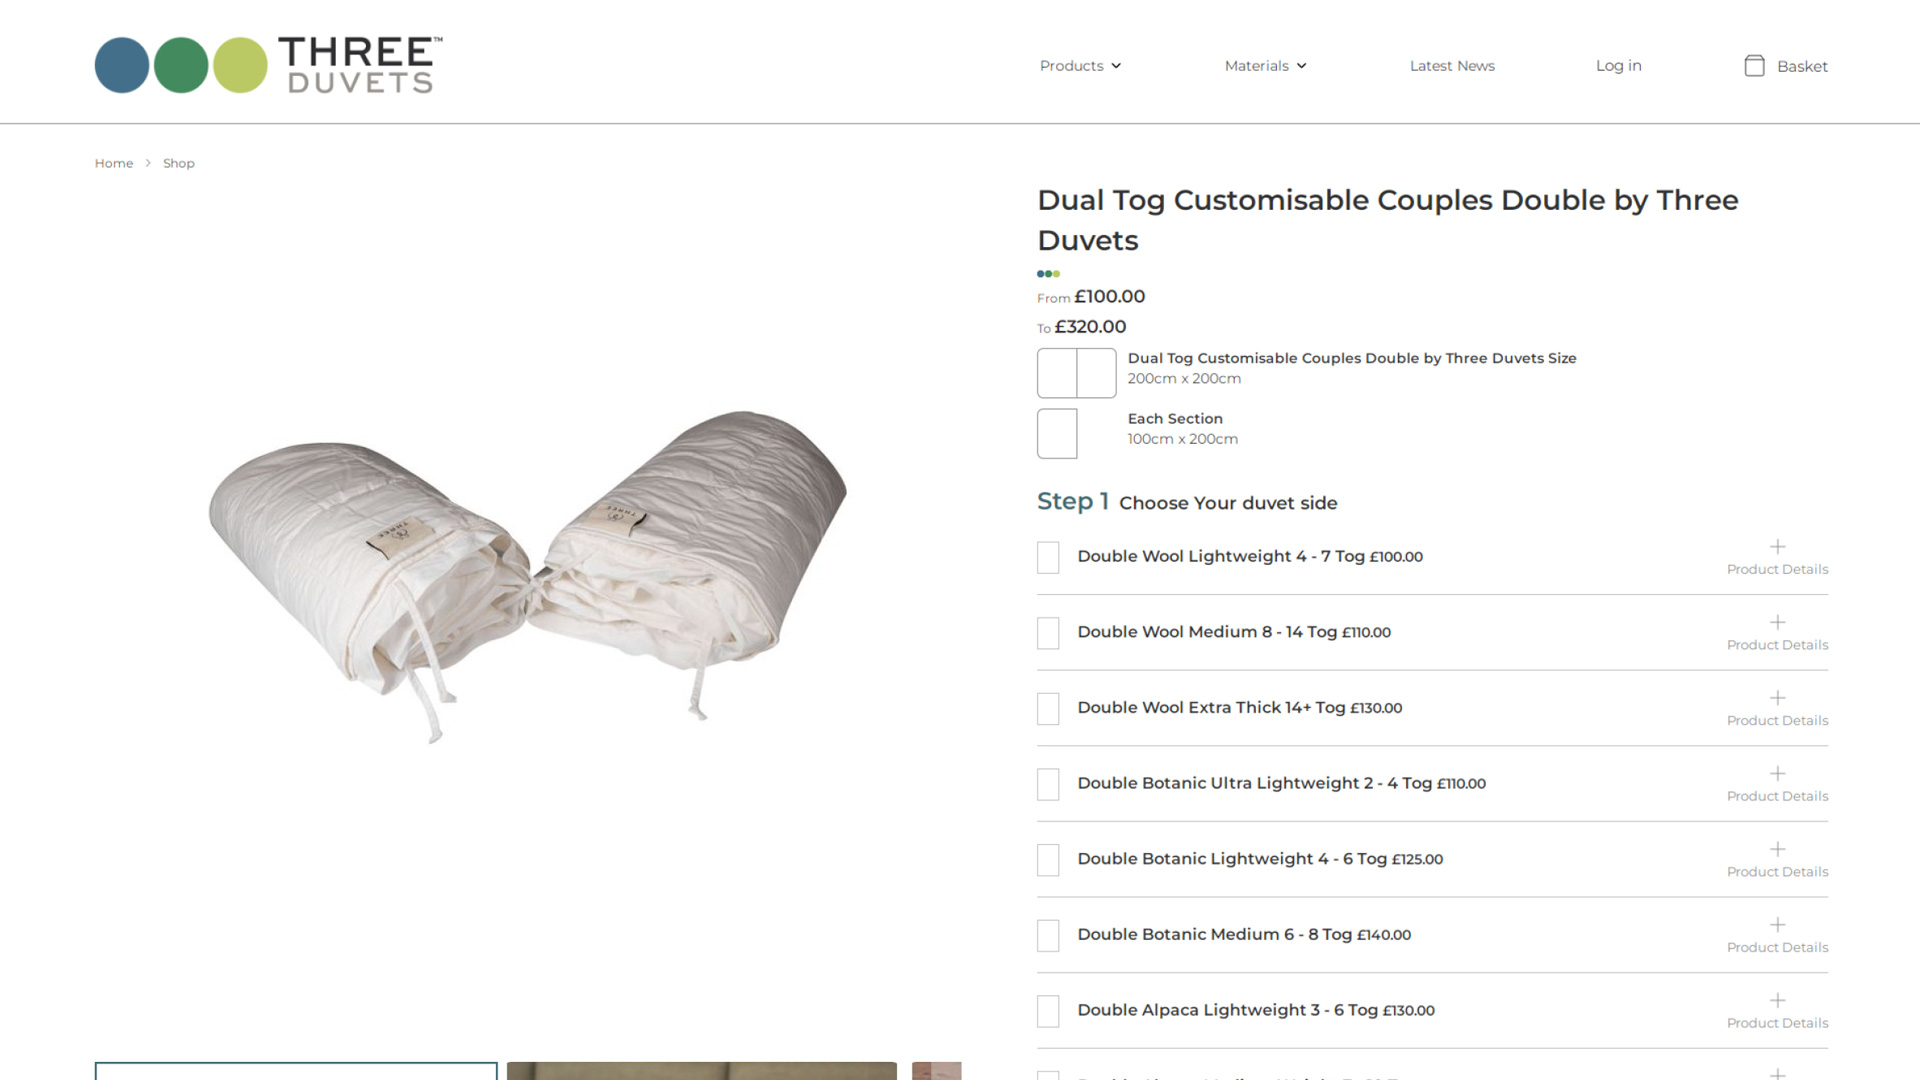 A view of the new Three Duvets website on desktop